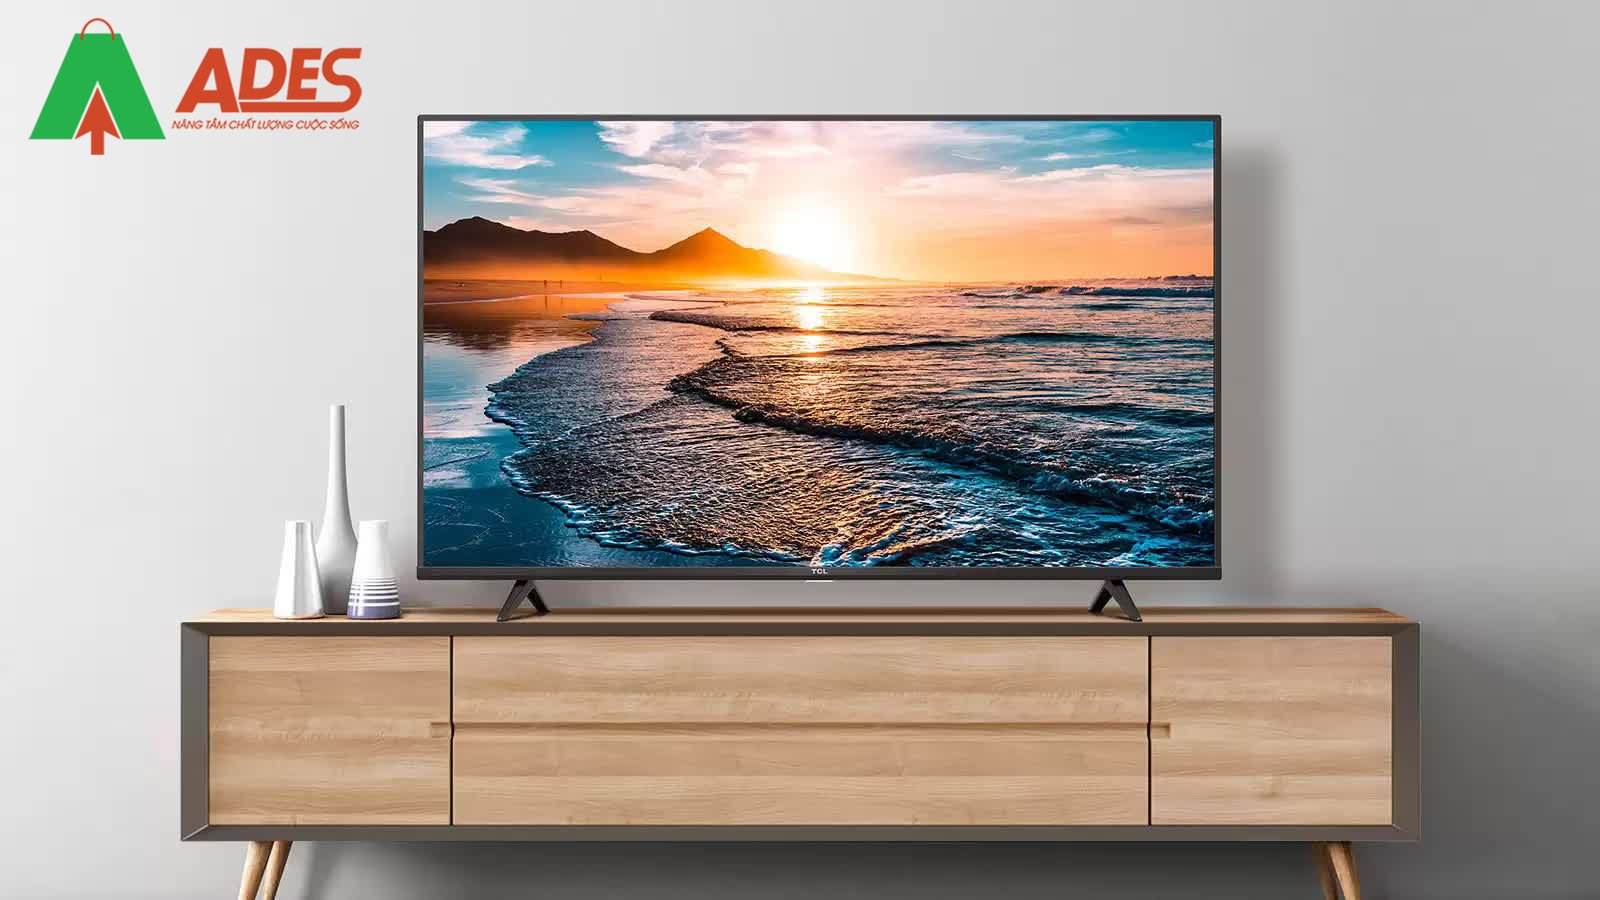 Hinh anh thuc te Android TiVi TCL 65 Inch 65P615